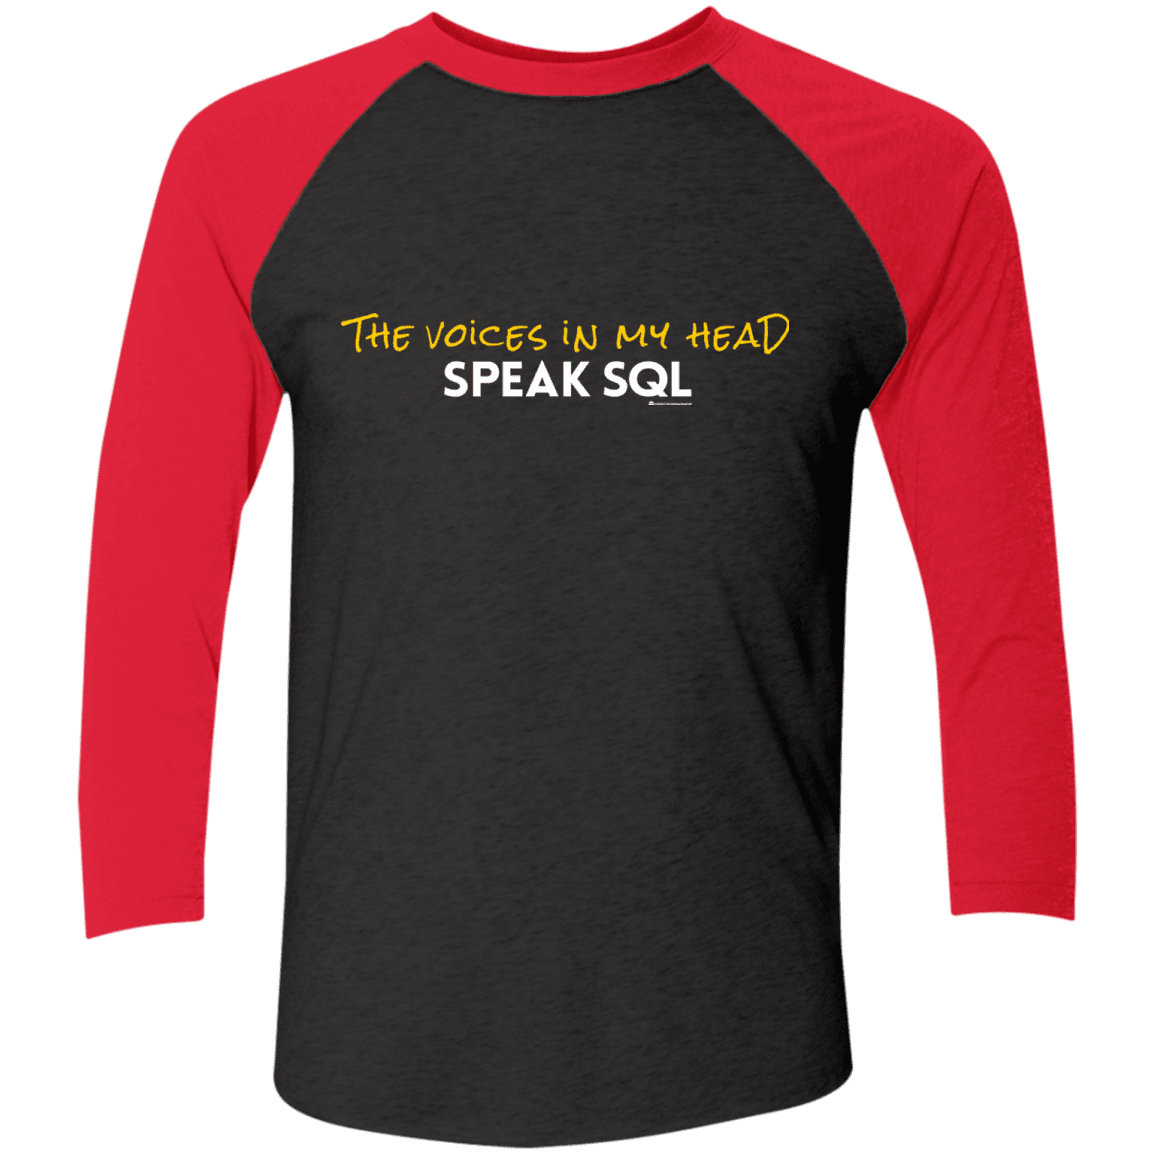 T-Shirts Vintage Black/Vintage Red / X-Small The Voices In My Head Speak SQL Men's Triblend 3/4 Sleeve